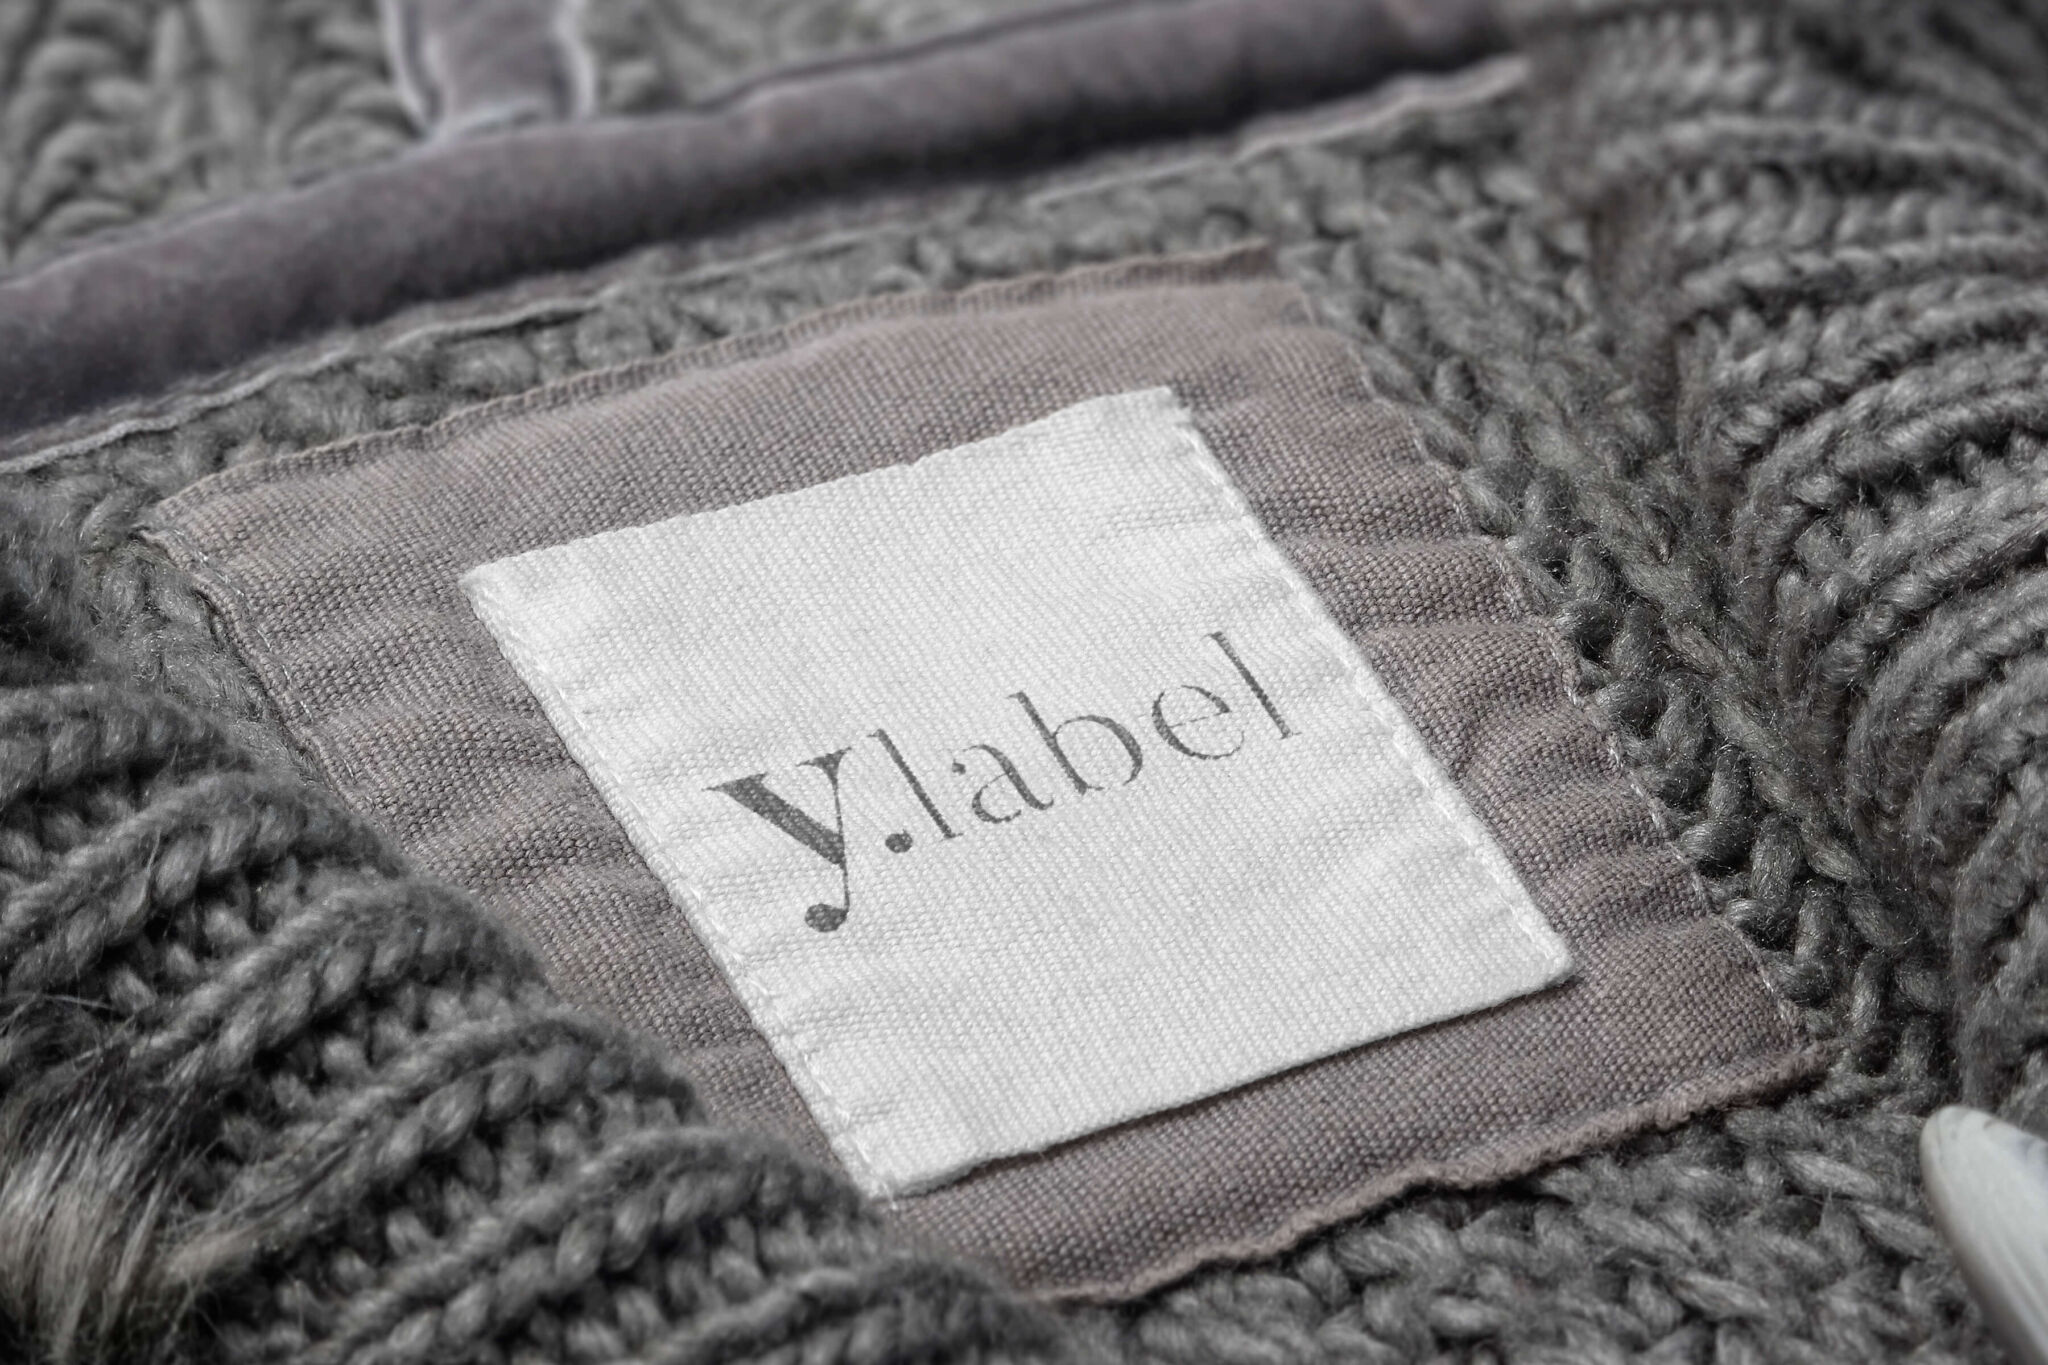 Y.Label – Your label, Our manufacture